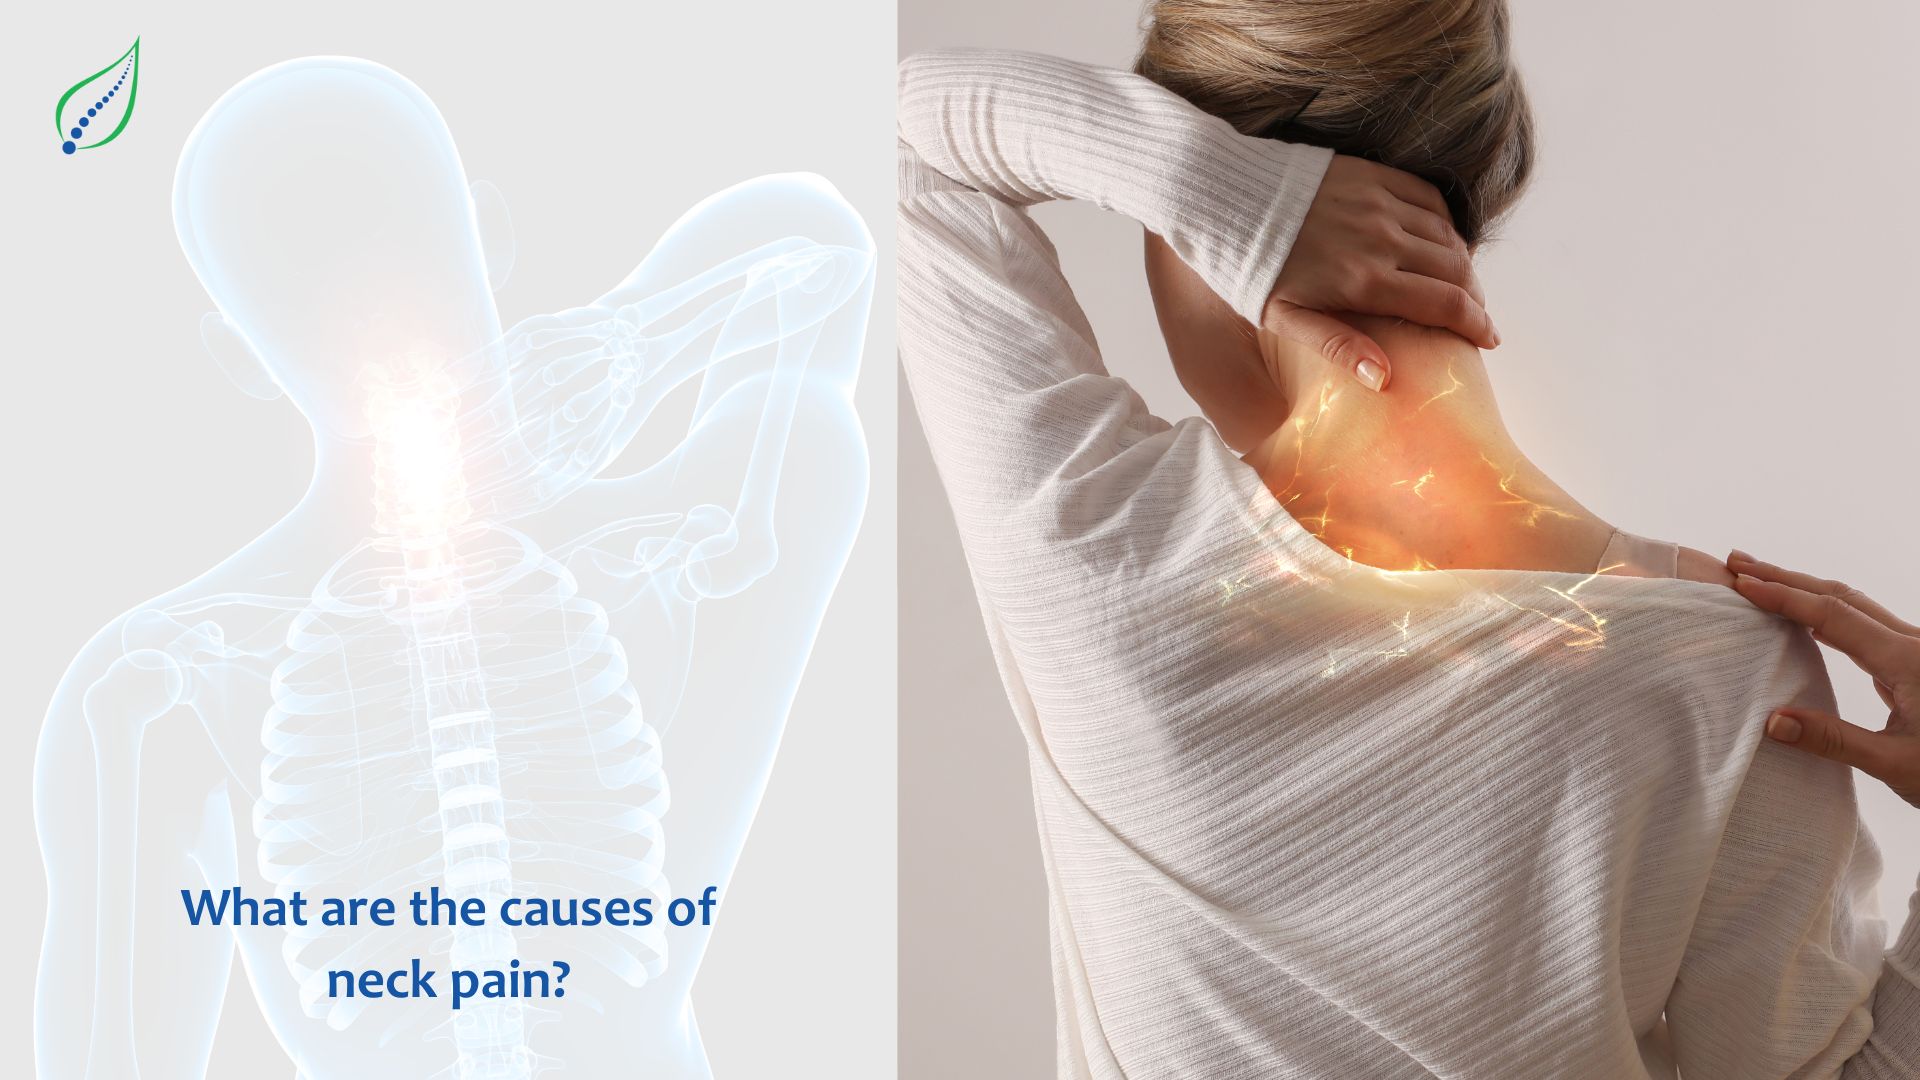 What are the causes of neck pain?